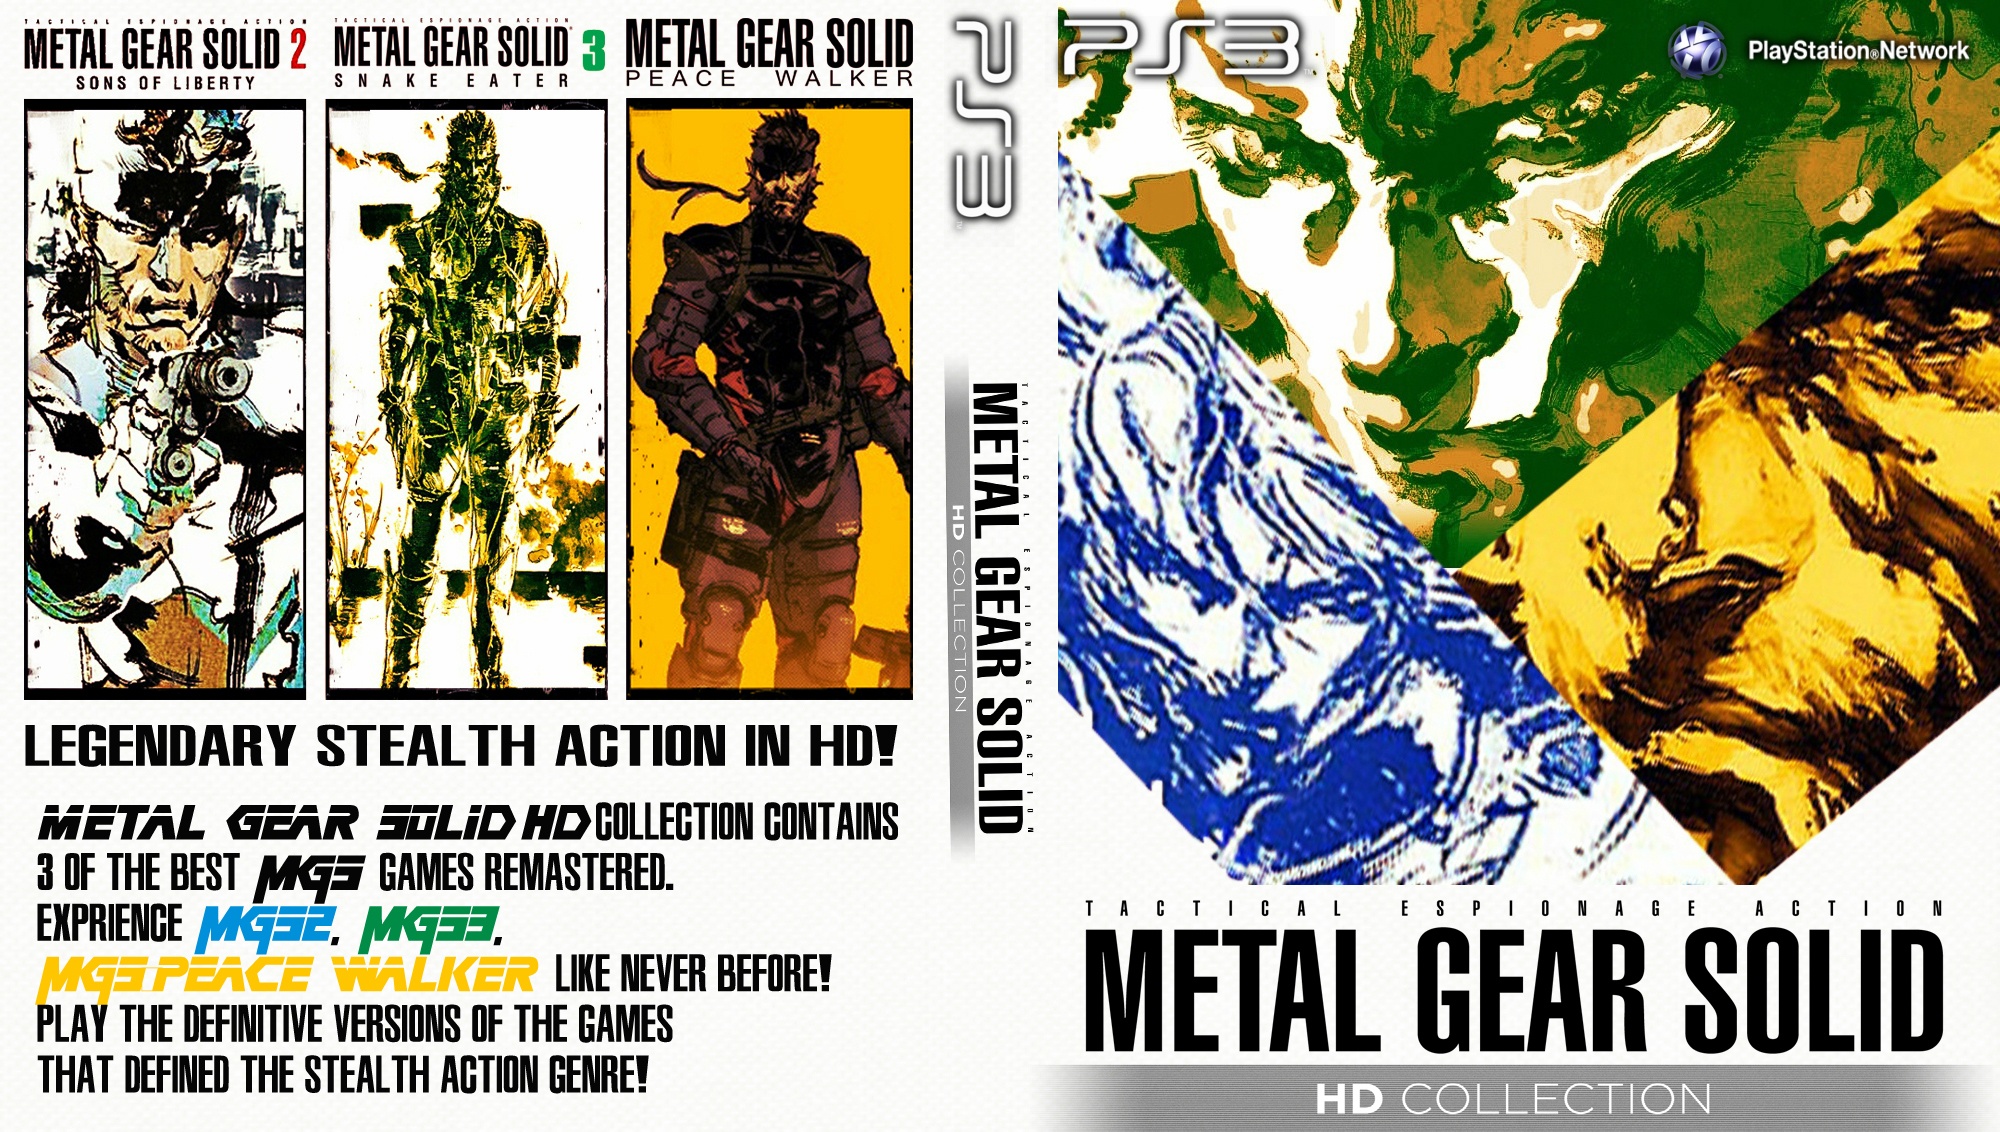 Metal Gear Solid HD Collection box cover